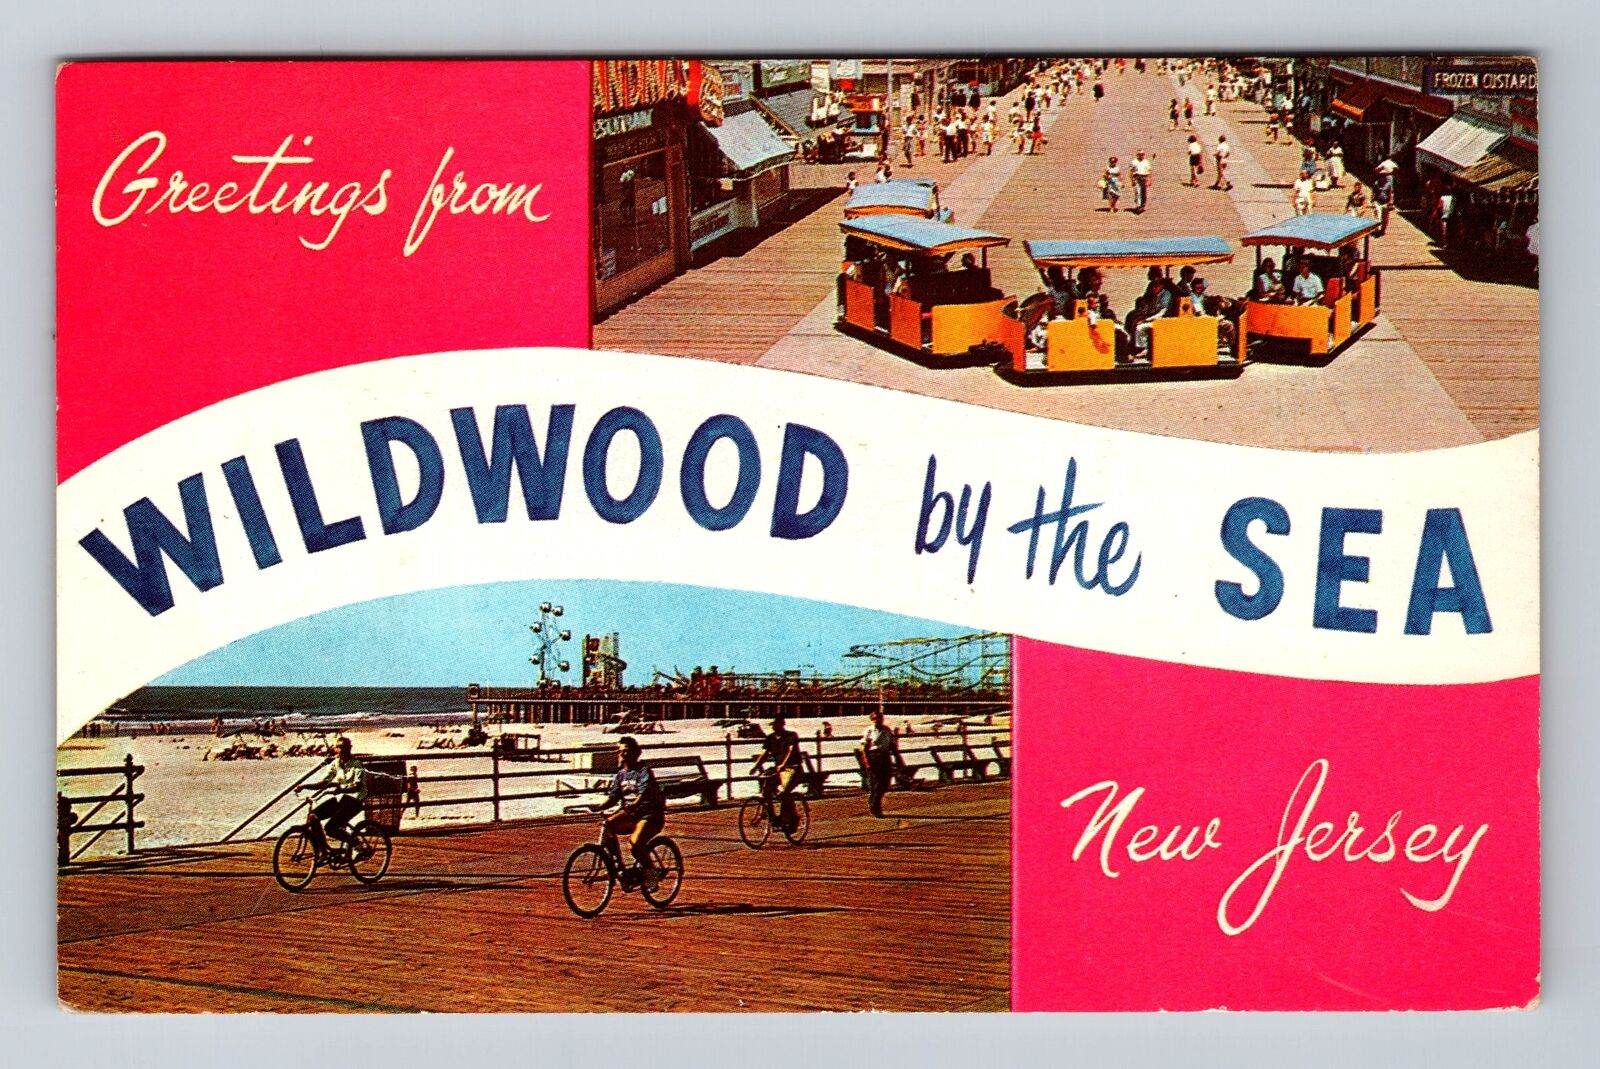 Wildwood by the Sea NJ-New Jersey, Scenic Banner Greeting, Vintage Postcard